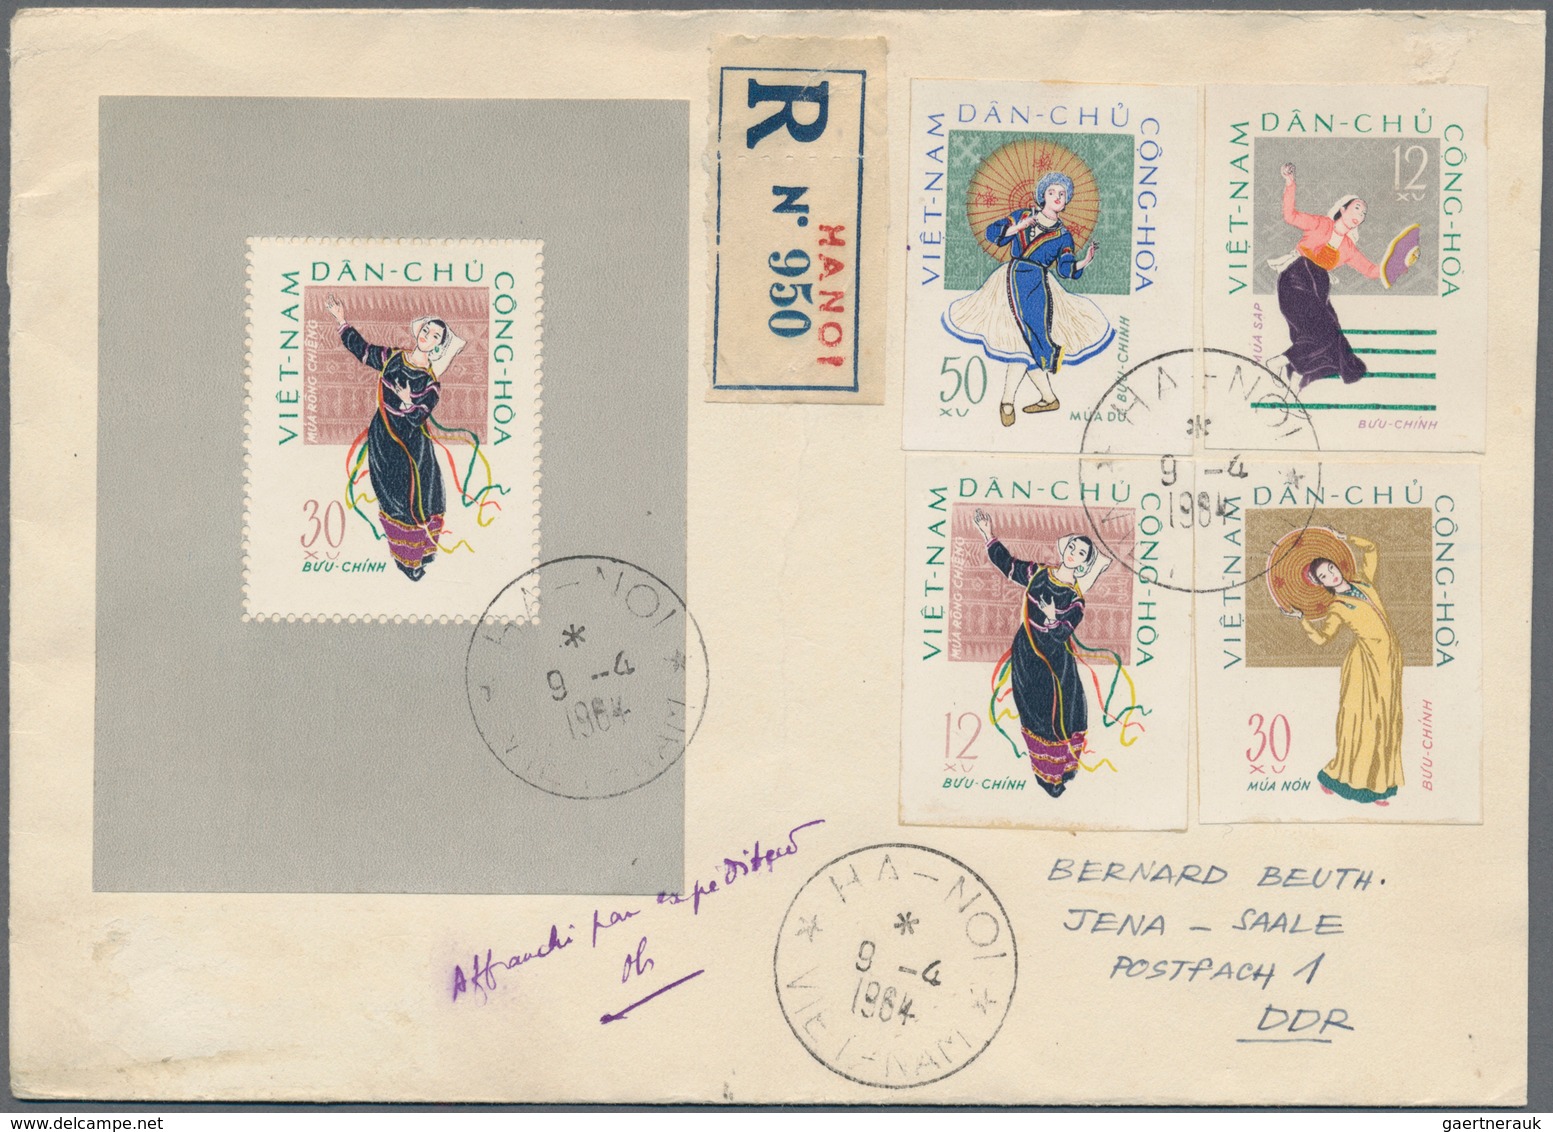 Vietnam-Nord (1945-1975): 1962, Registered Cover Addressed To Jena-Saale, East Germany, Bearing Comp - Vietnam